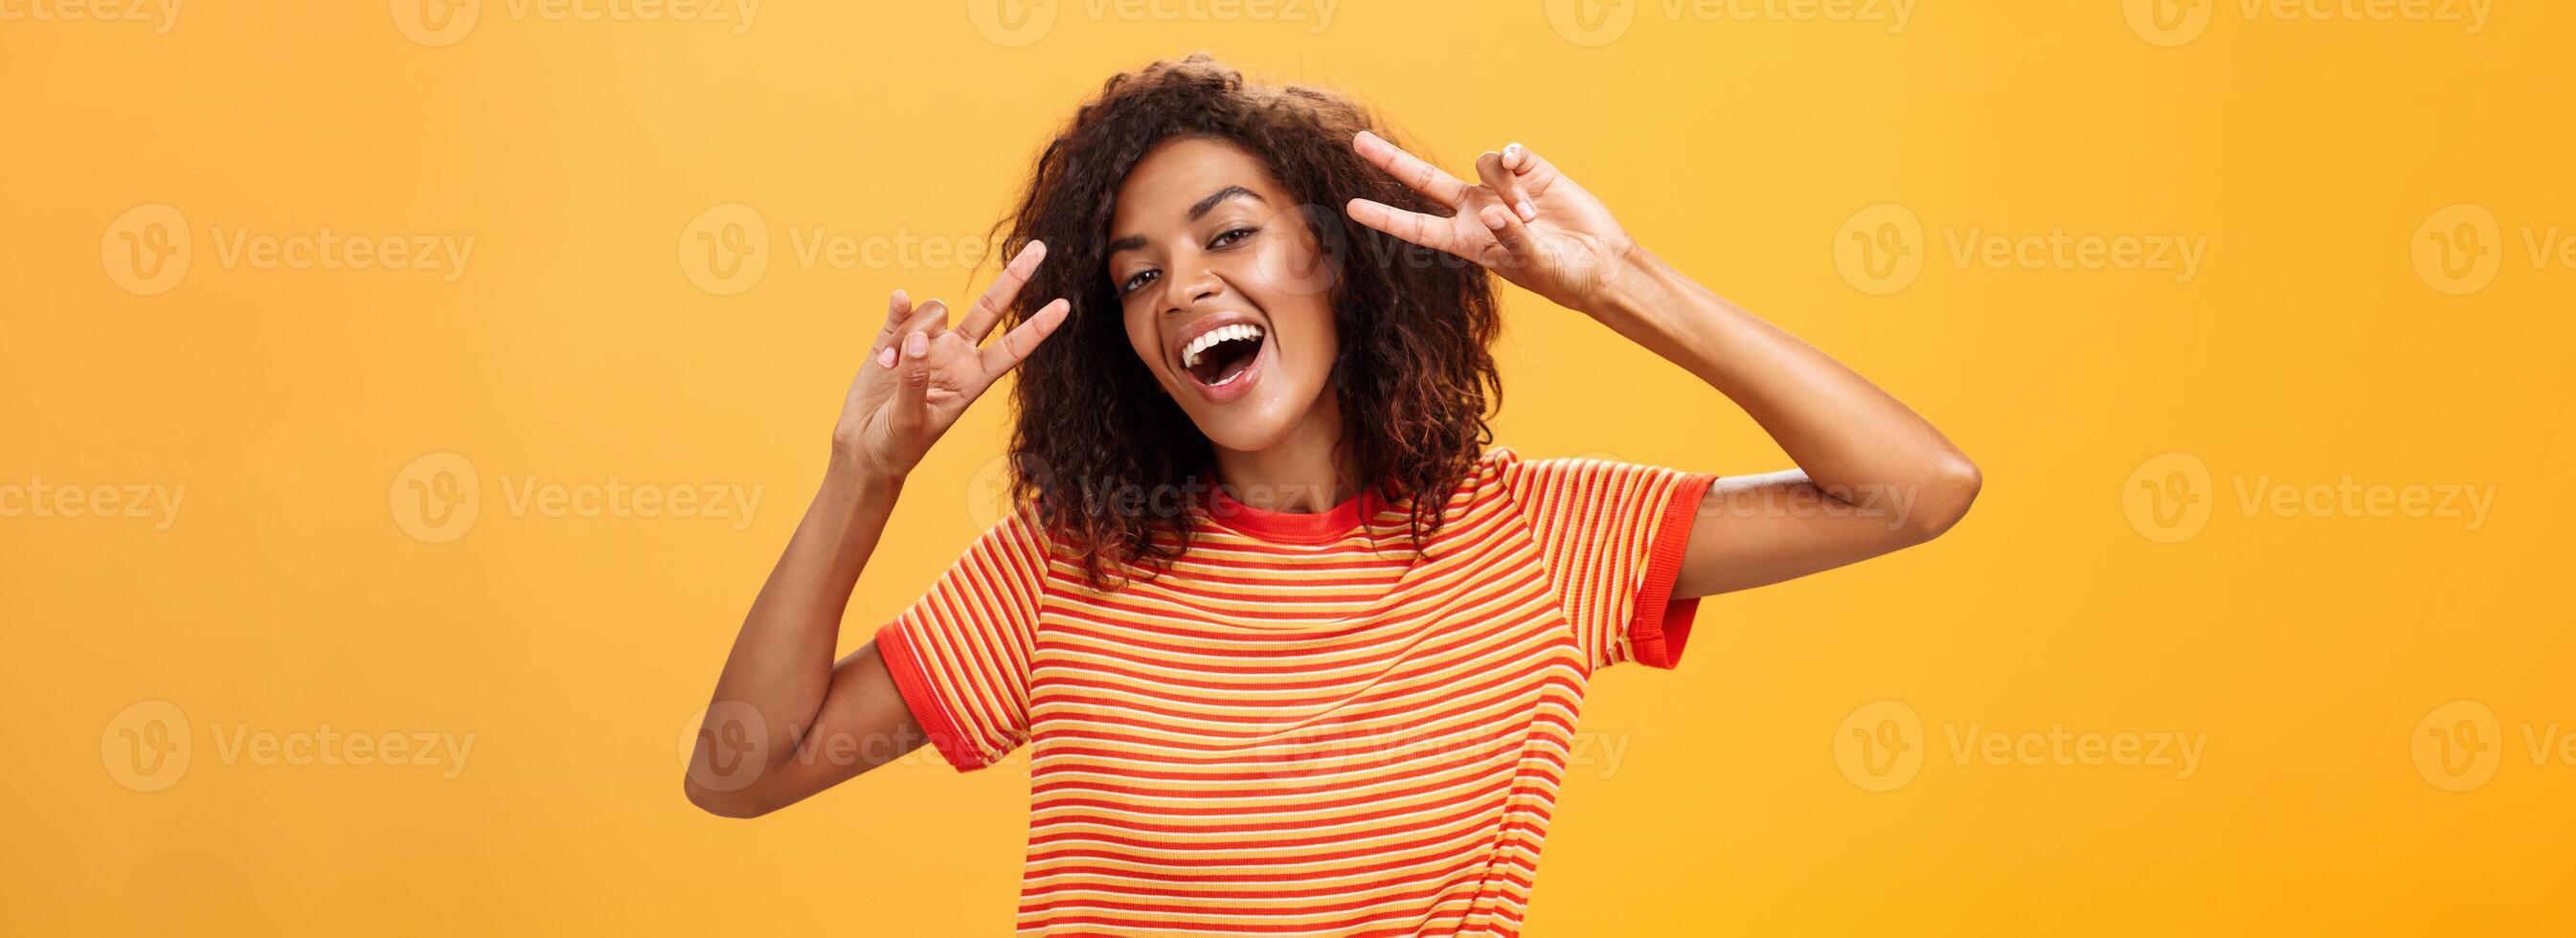 Nobody gonna spoil my perfect mood. Portrait of happy optimistic attractive dark-skinned female model with curly hairstyle tilting head smiling carefree showing peace or victory signs near face photo